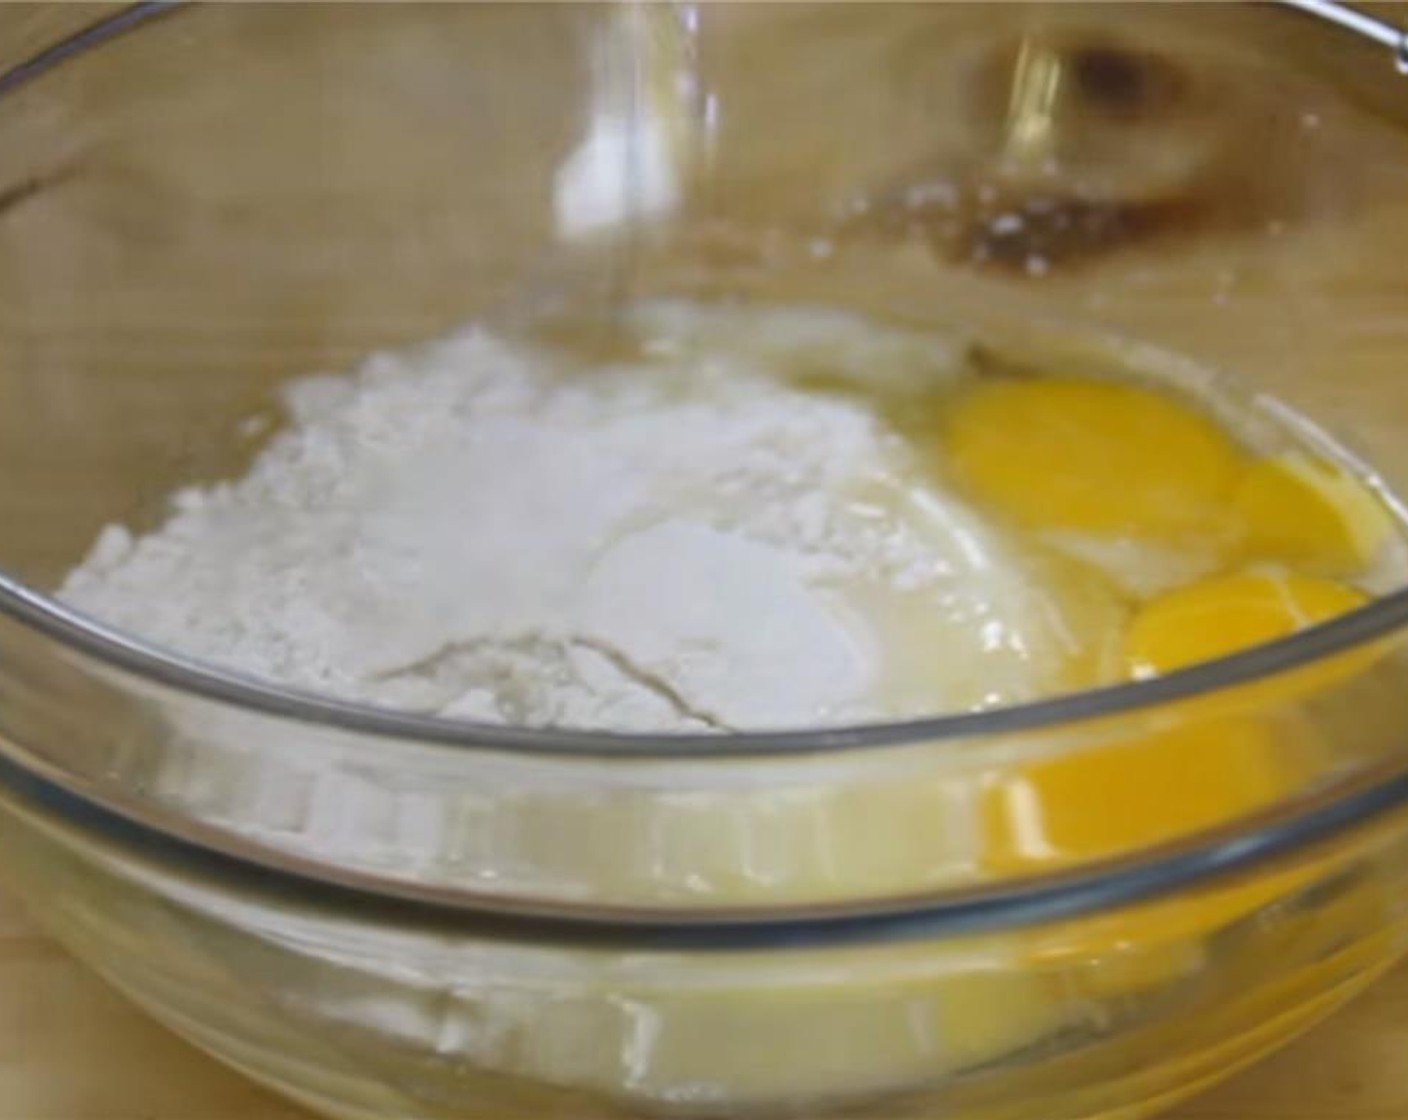 step 6 In a separate bowl, combine Eggs (3), All-Purpose Flour (2 1/2 Tbsp), Granulated Sugar (1 cup), and Lemons (2). Mix until they are well incorporated.